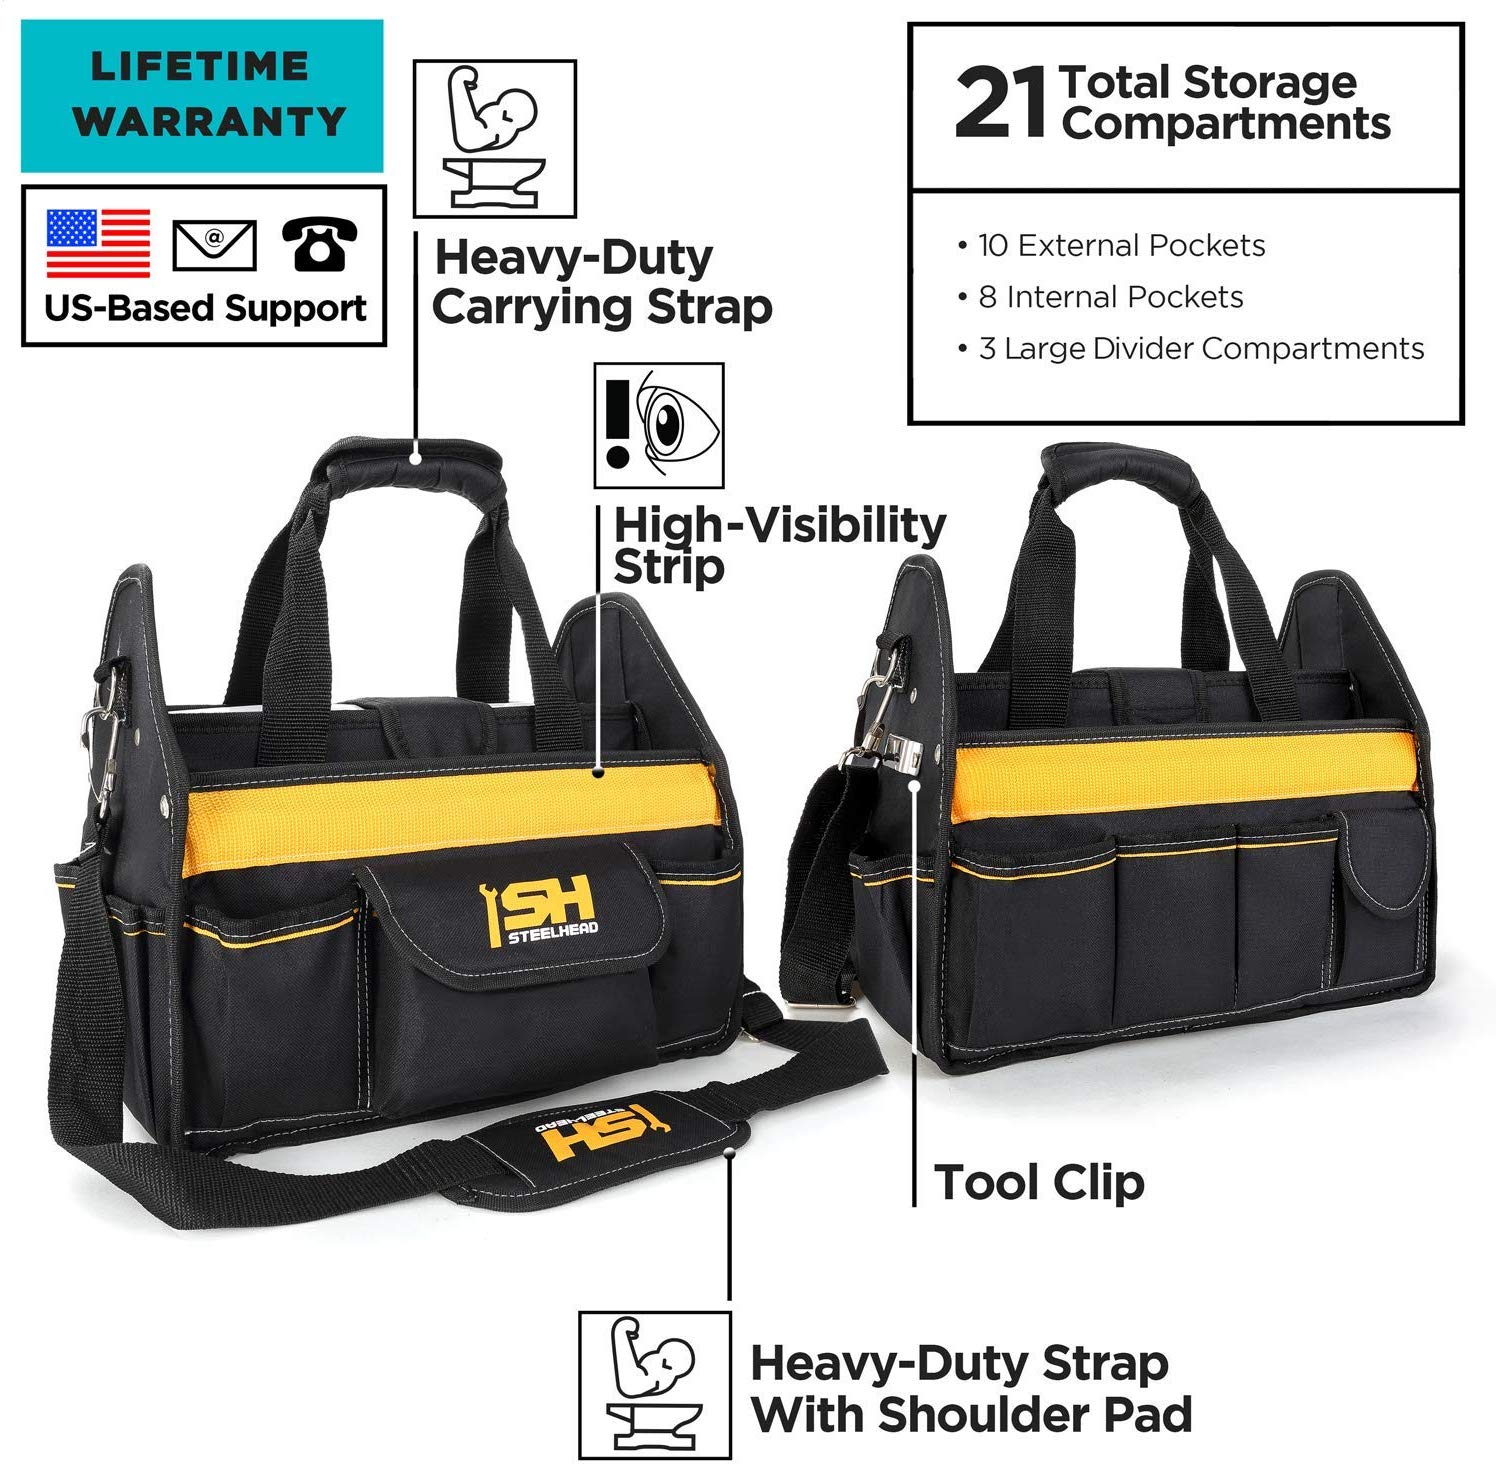 STEELHEAD 117-Piece Tool Set, Screwdriver Handle, 33 Bits, Screwdrivers, Pliers, Tape Measure, 9” Level, Hammer, Prybar, Wrenches, Scissors, Saw, Clamps, 14” Tool Tote, Home, Office, USA-Based Support - image 1 of 3